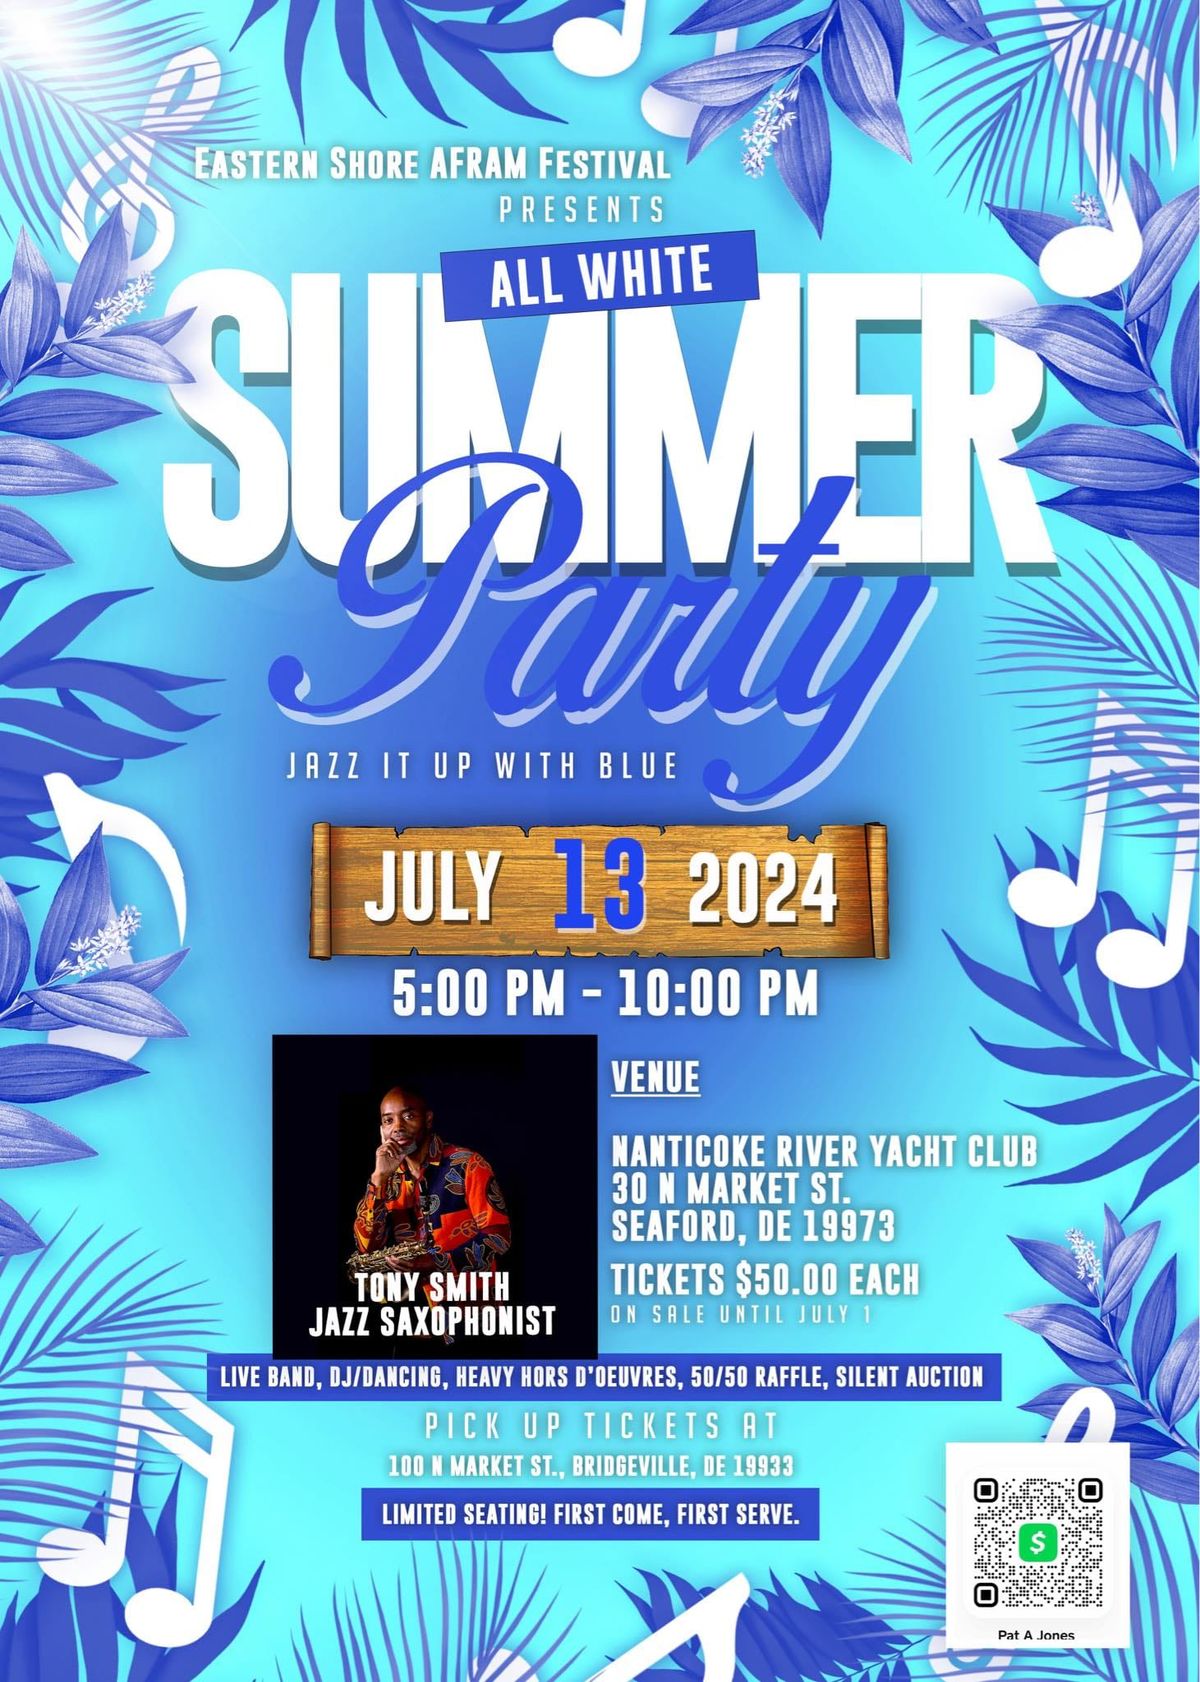 All White Party JAZZ it up with BLUE 